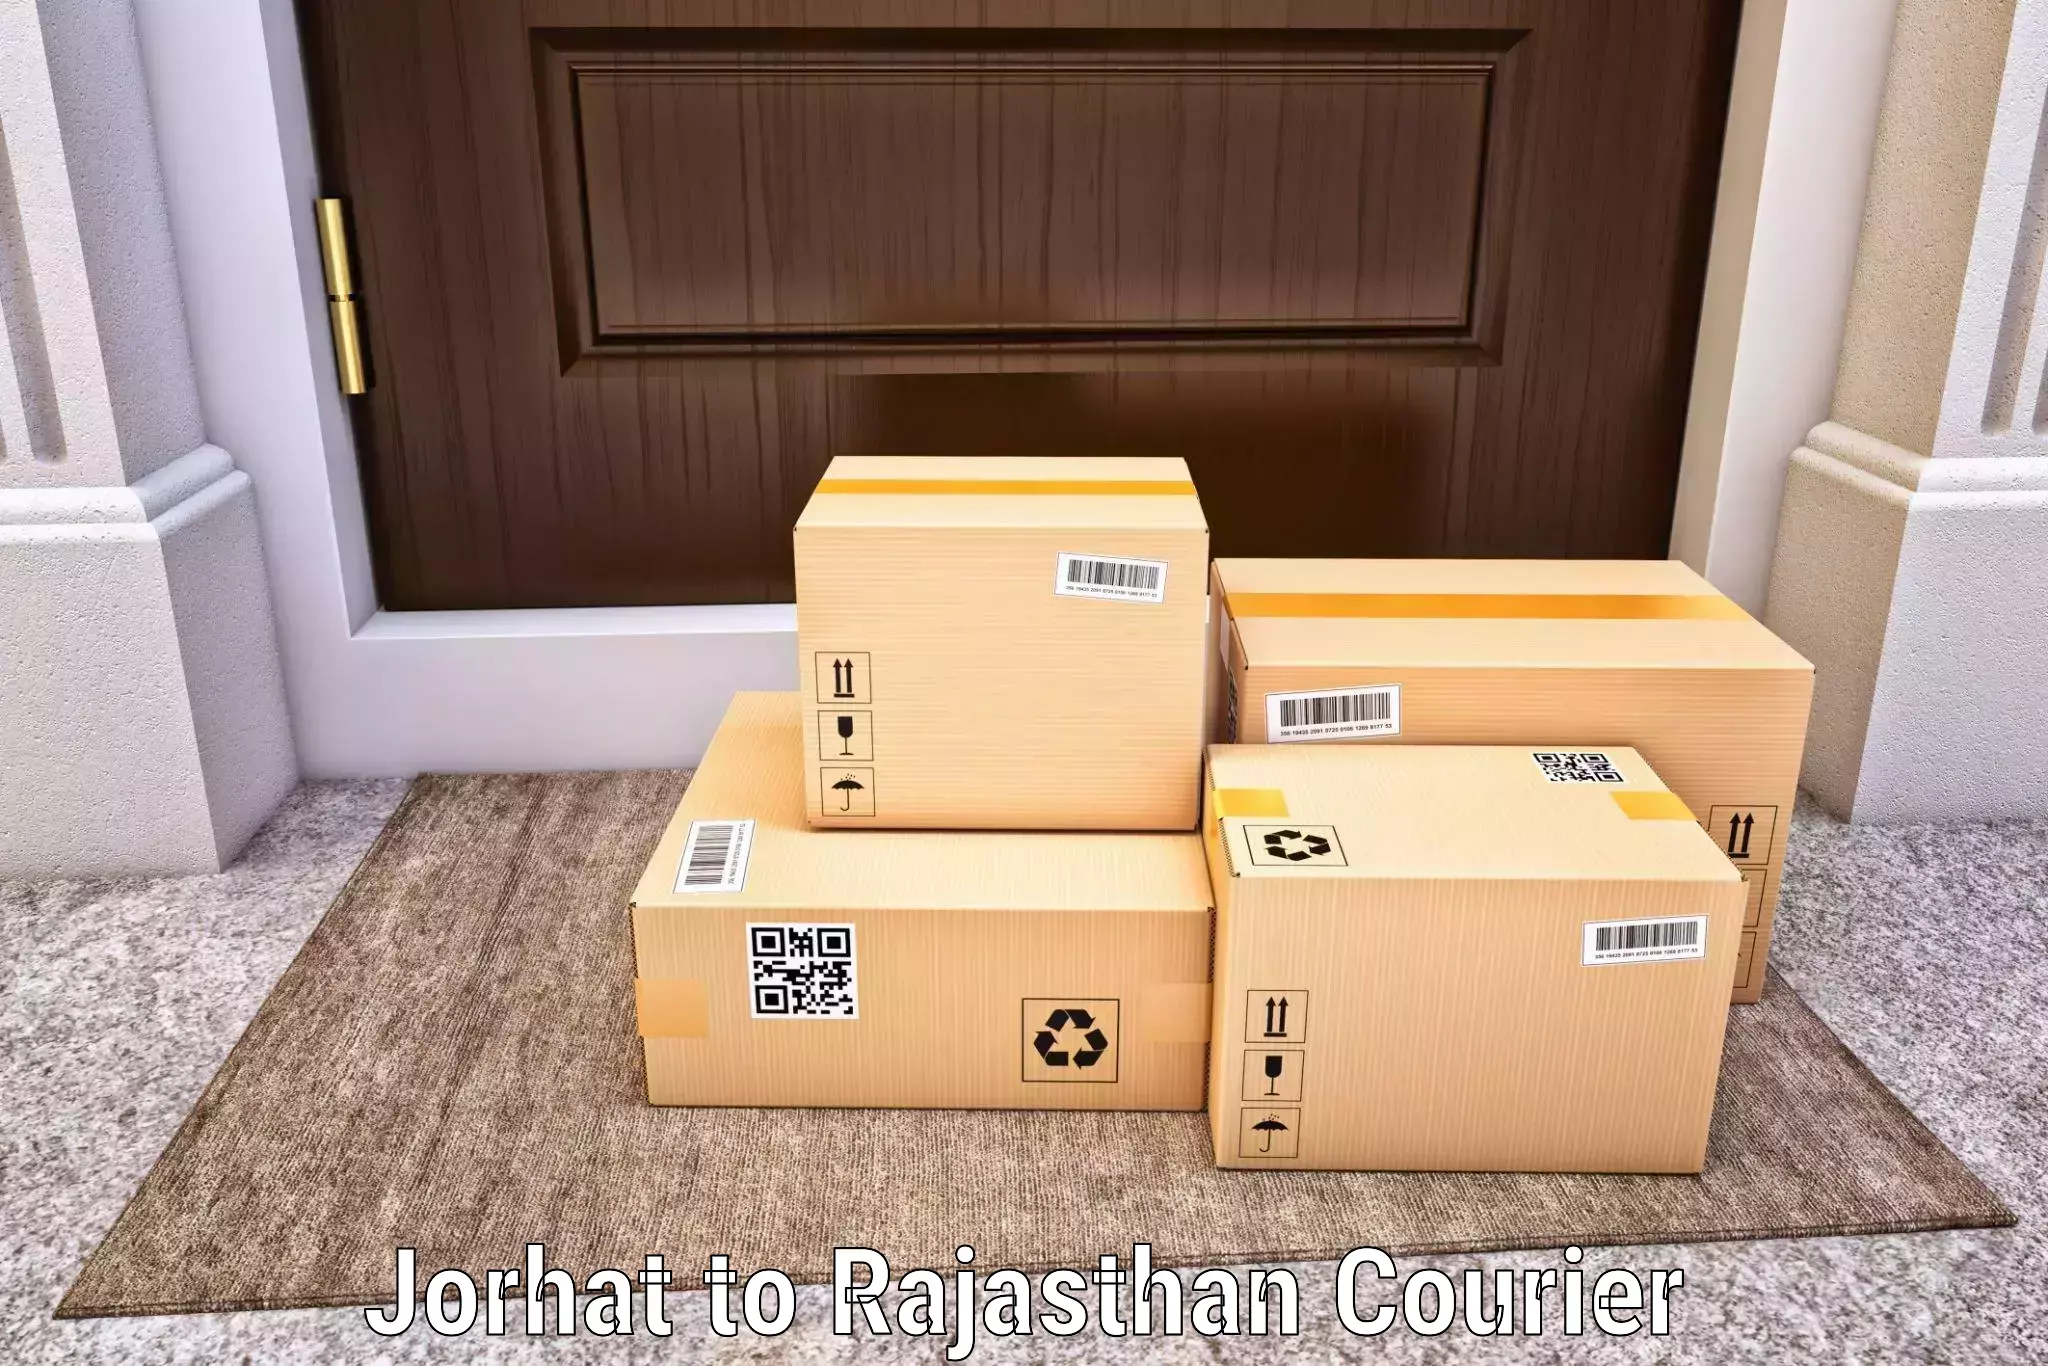 State-of-the-art courier technology Jorhat to Deogarh Rajsamand